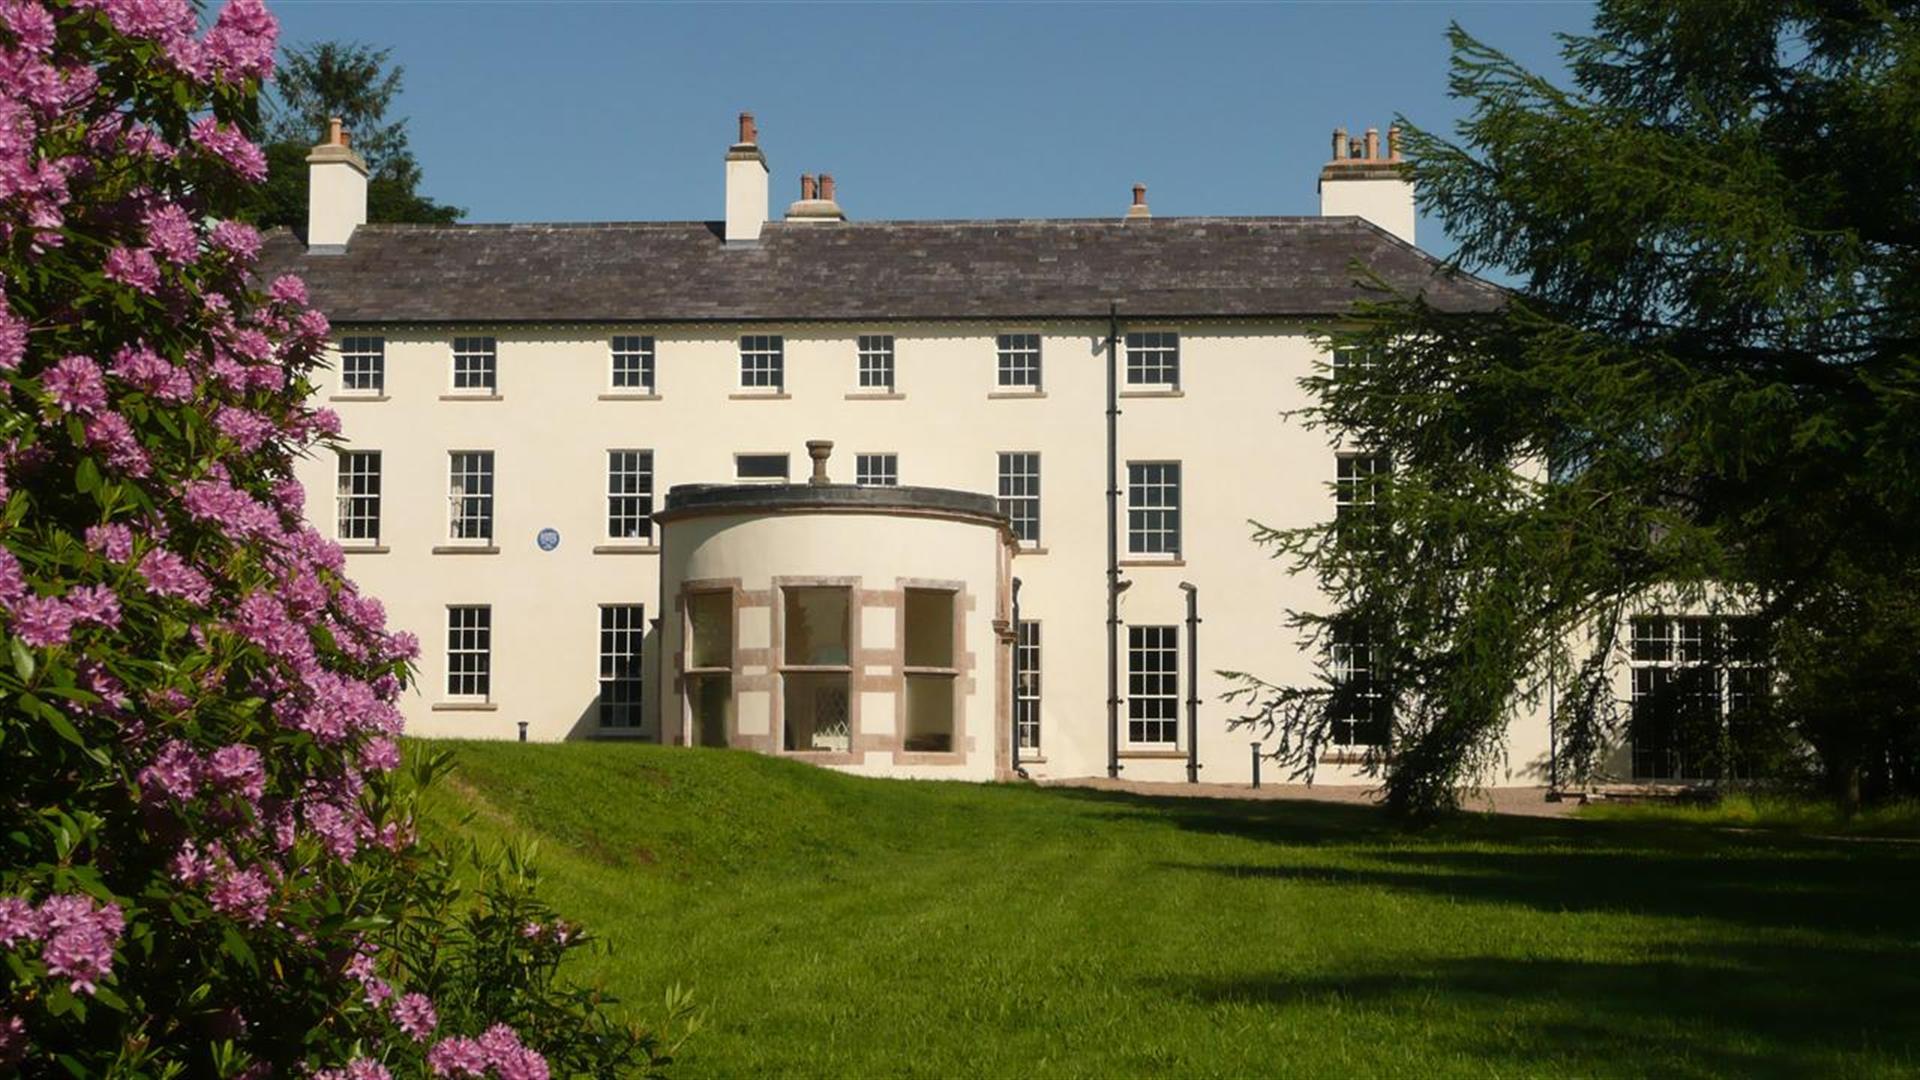 The front of Lissan House from the garden